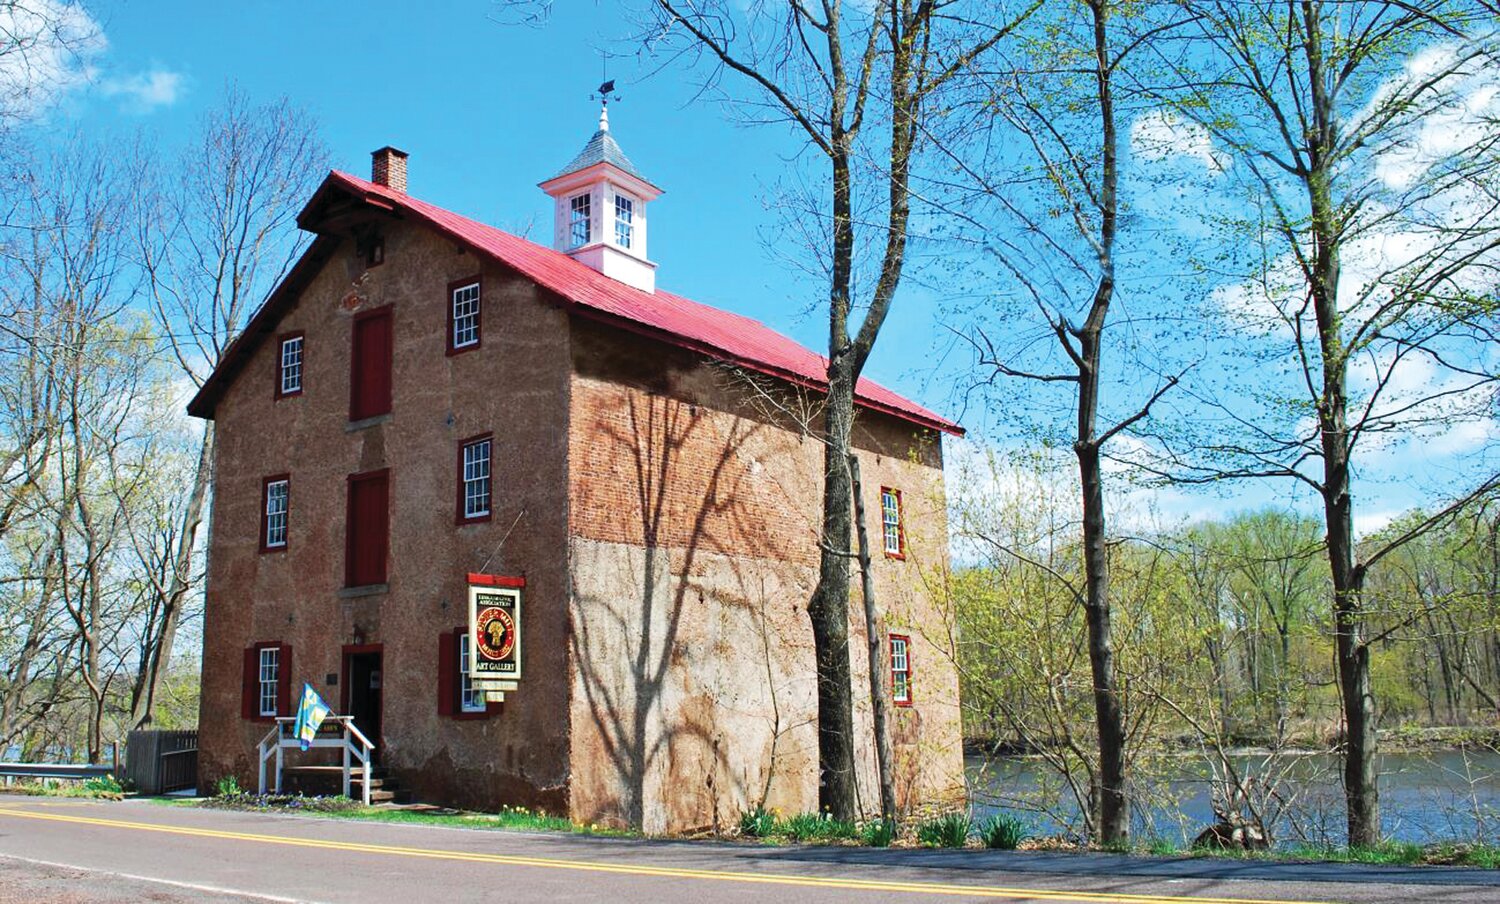 The 191-year old Stover Mill, photographed in 2017.